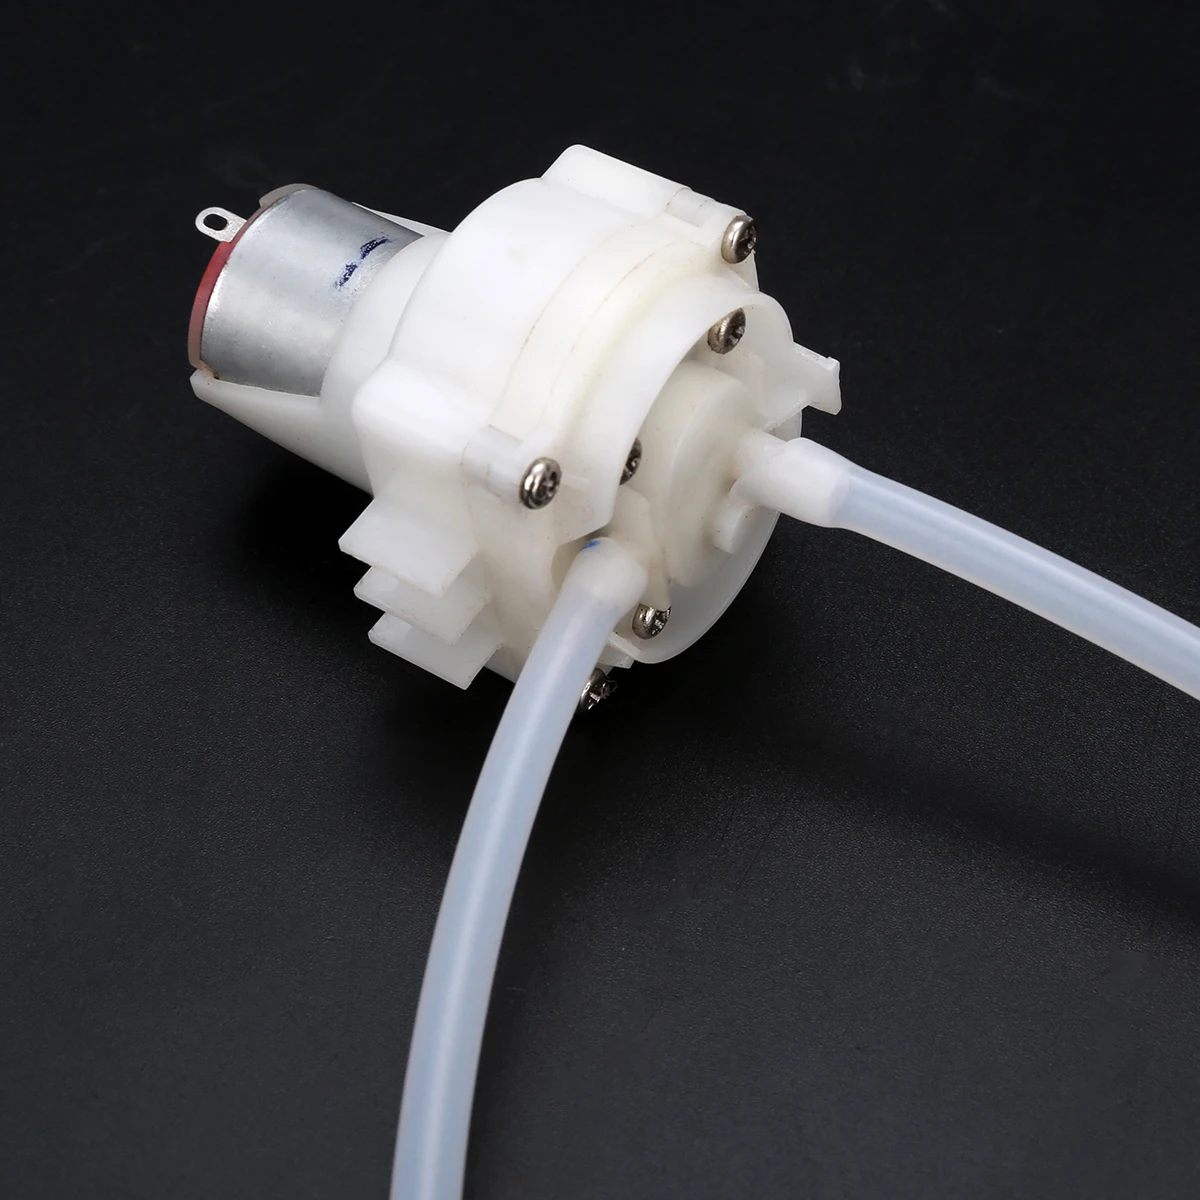 

New Oil Pump DC 3.7V-6V 5V Adjustable Micro Gear Self-Priming Water Pump Mini Oil Pump stable performance With 1M Pipe